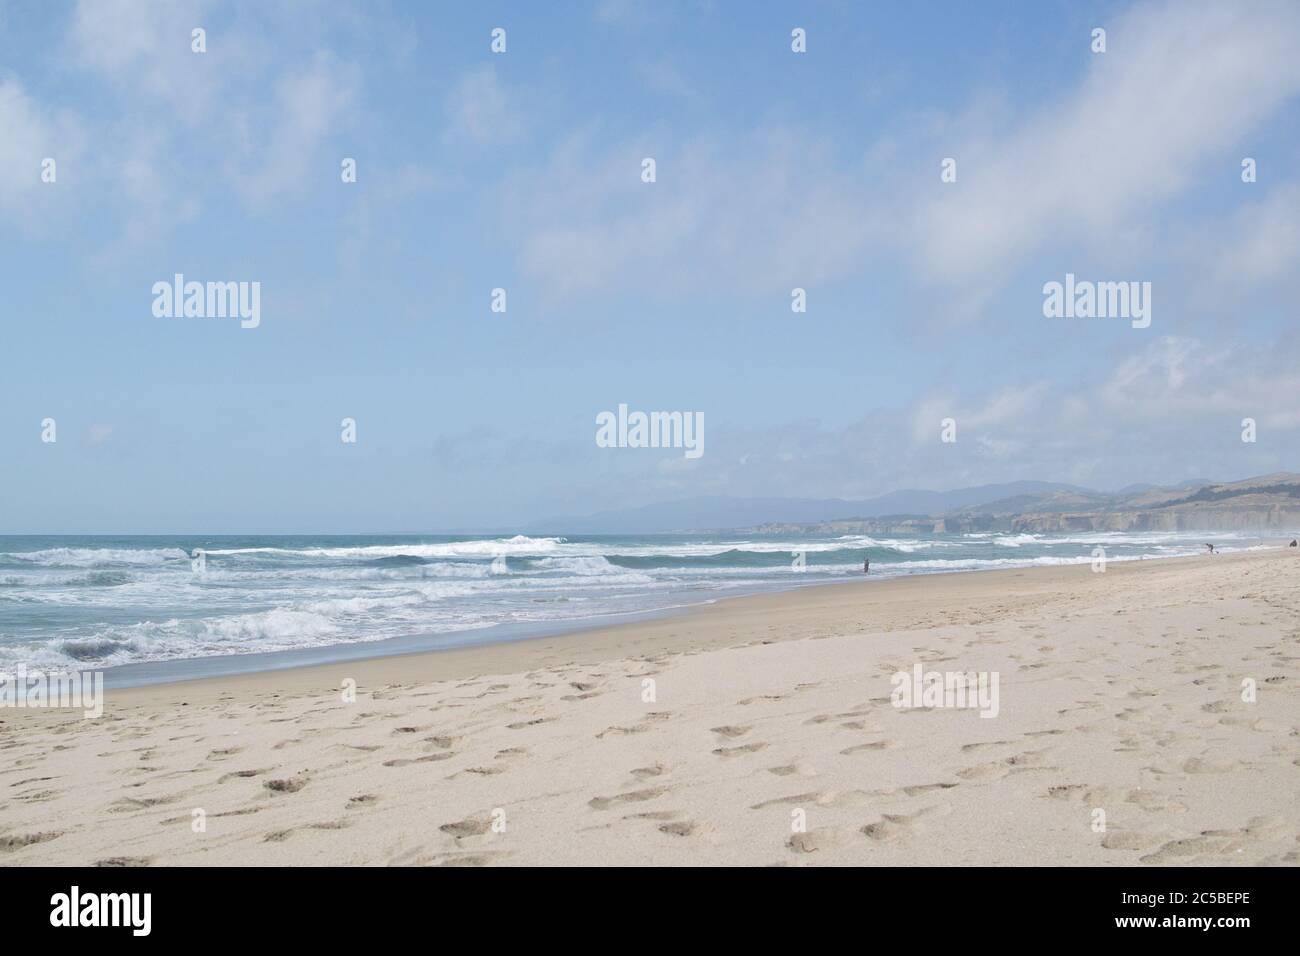 San Gregorio State Beach, blue sky, white fluffy clouds, waves rolling in, pale sand with footprints, cliffs and mountains in distance. Stock Photo